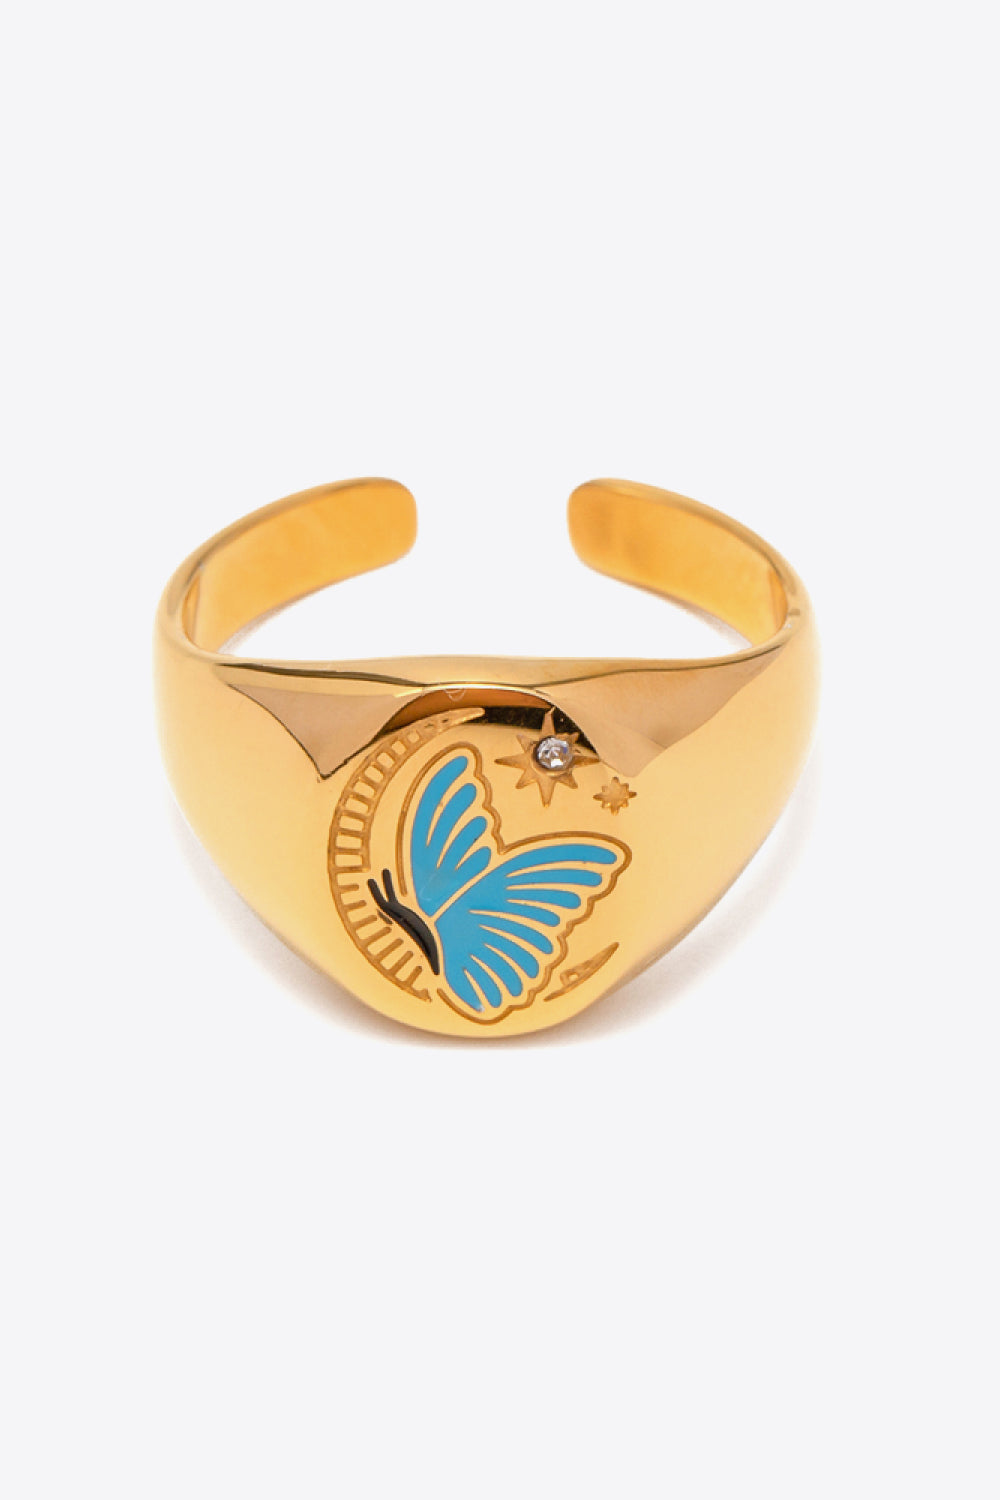 Elevate your style with our Stainless Steel Butterfly Open Ring. This durable and stylish stainless steel ring features an elegant butterfly design, perfect for adding a touch of charm to your jewelry collection.